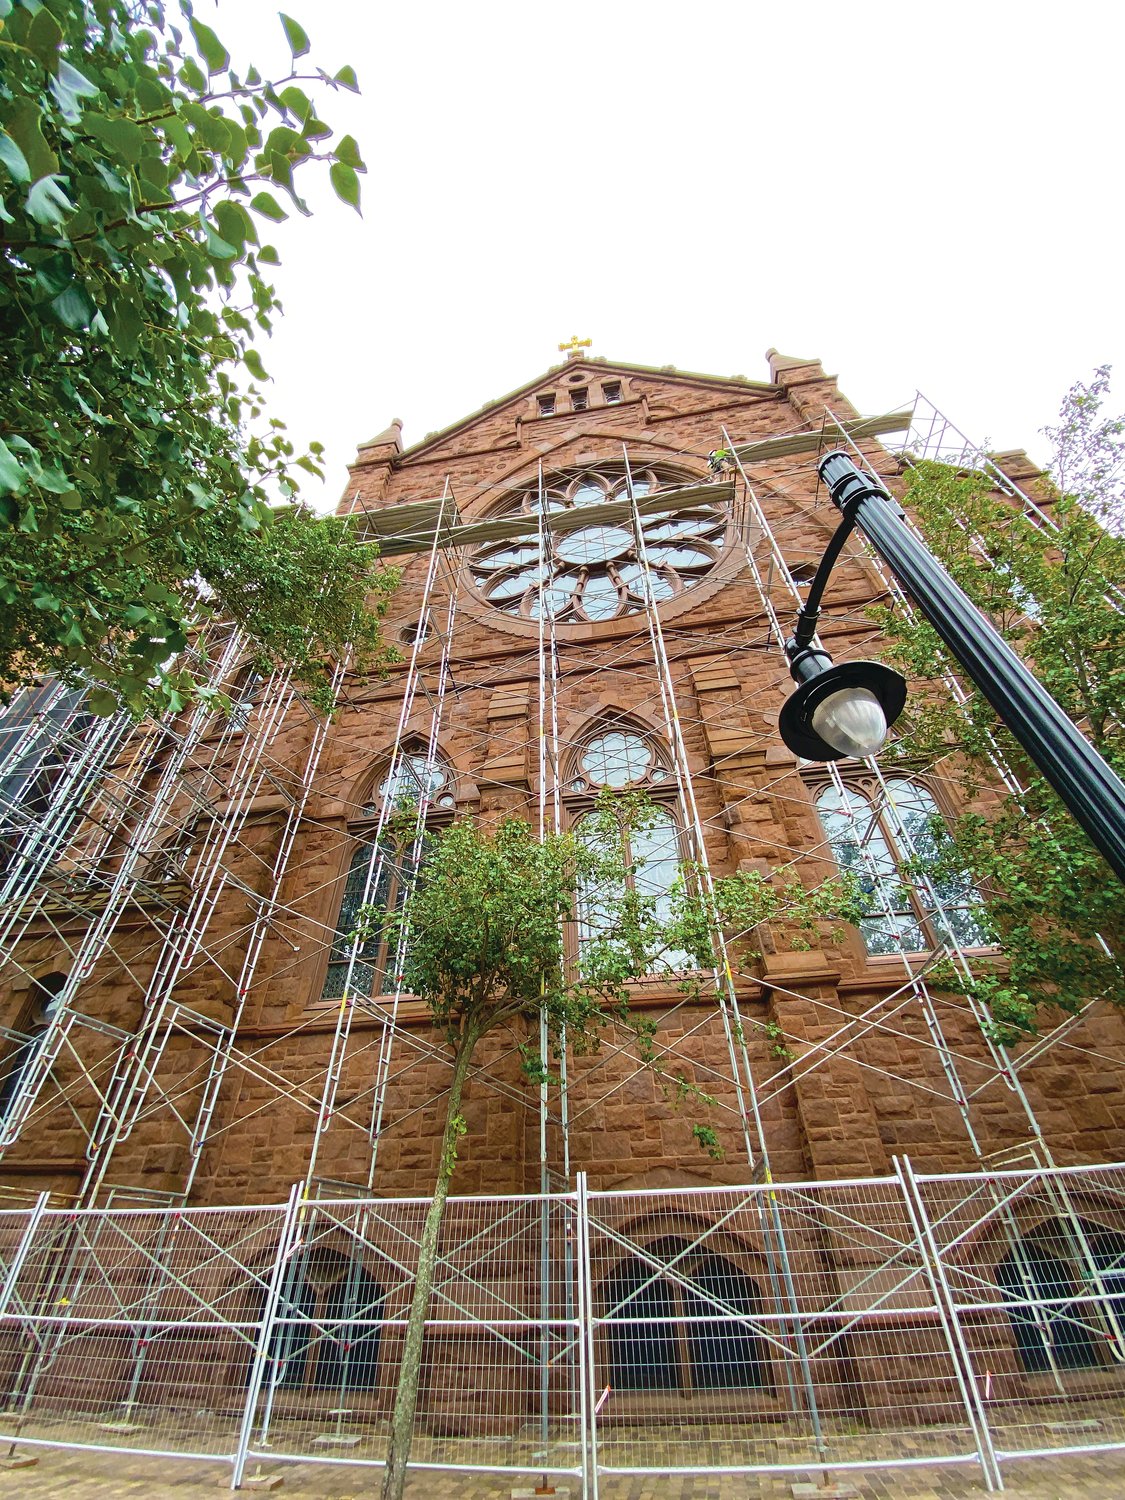 Staging begins around the Cathedral of SS. Peter in Paul in Providence as part of a 9-month-long project of significant renovations to the roof and other necessary projects around the perimeter of the historic building that was consecrated in 1889.